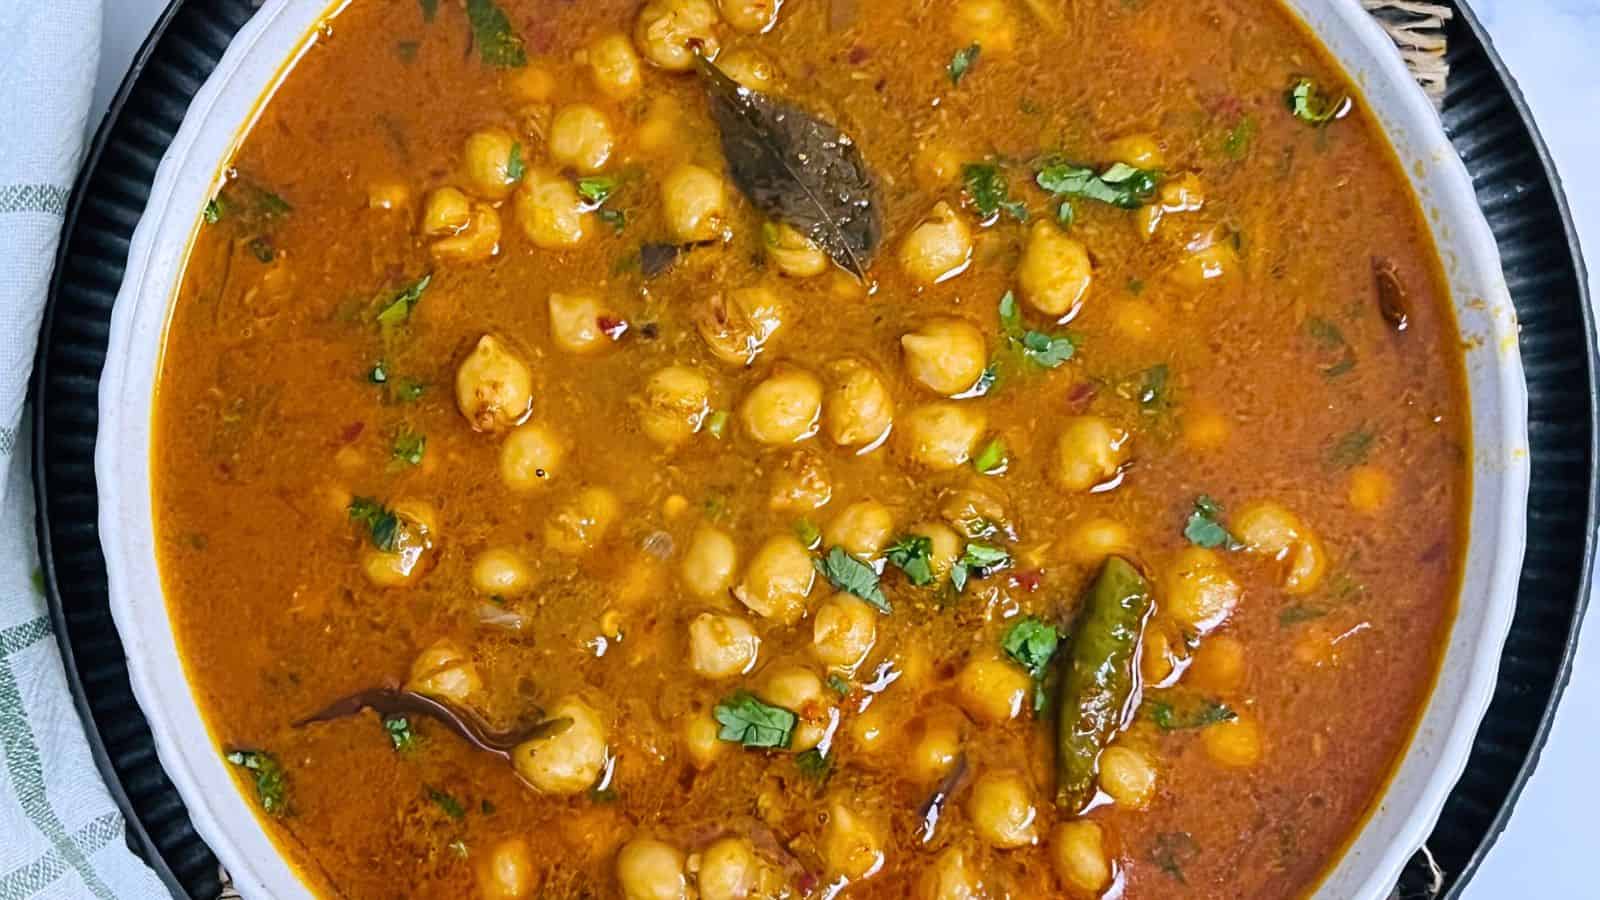 <p>Dig into the heart of Southern Indian cuisine with this Chana Masala. It's a vegetarian delight that pairs perfectly with your favorite flatbread or rice. This is comfort food made for every palate, vegan or otherwise.<br><strong>Get the Recipe: </strong><a href="https://easyindiancookbook.com/south-indian-chana-masala/?utm_source=msn&utm_medium=page&utm_campaign=msn">South Indian Chana Masala</a></p>